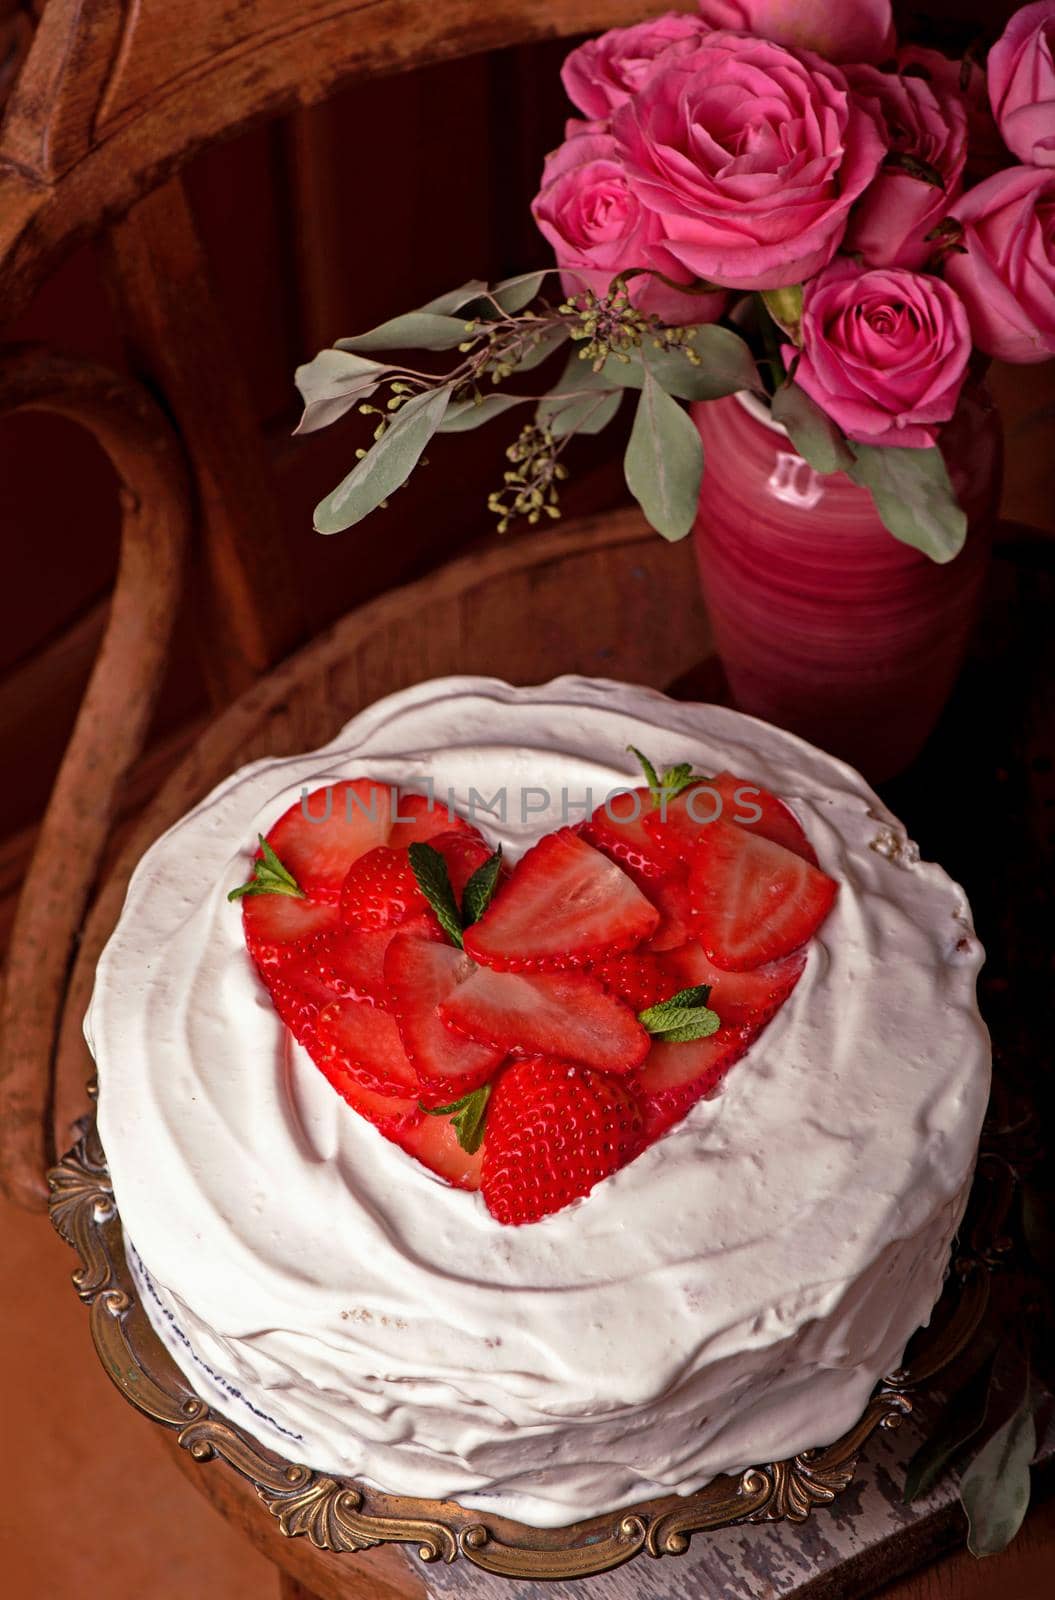 Homemade cream layer cake, fresh, colorful, and delicious dessert with juicy strawberries, sweet whipped cream and cream cheese